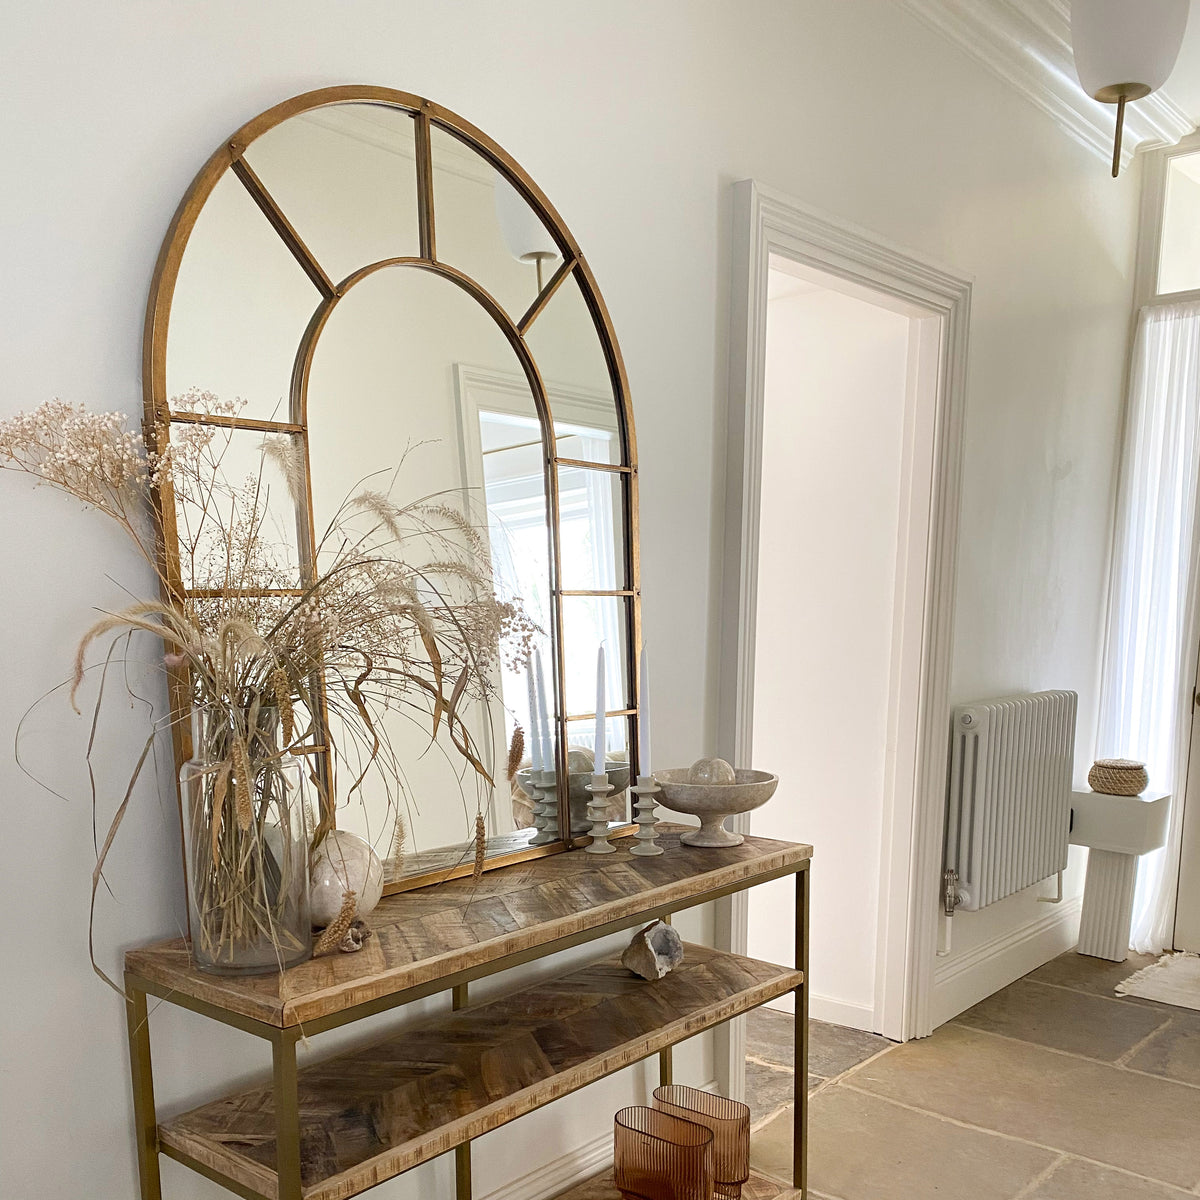 Gold industrial arched metal wall mirror on wooden console table